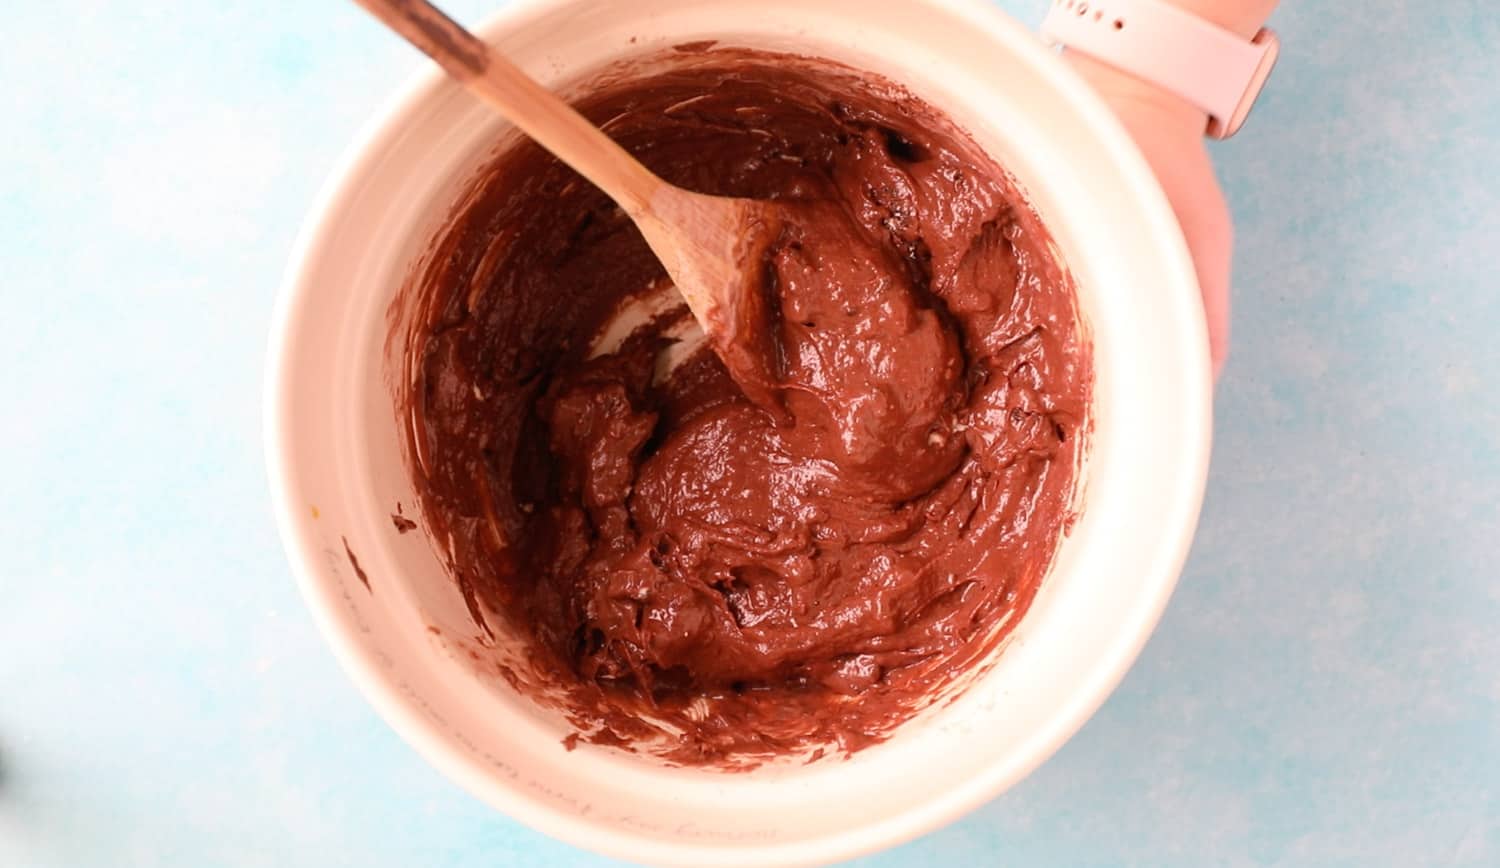 A mixing bowl with the ingredients for Oreo muffins